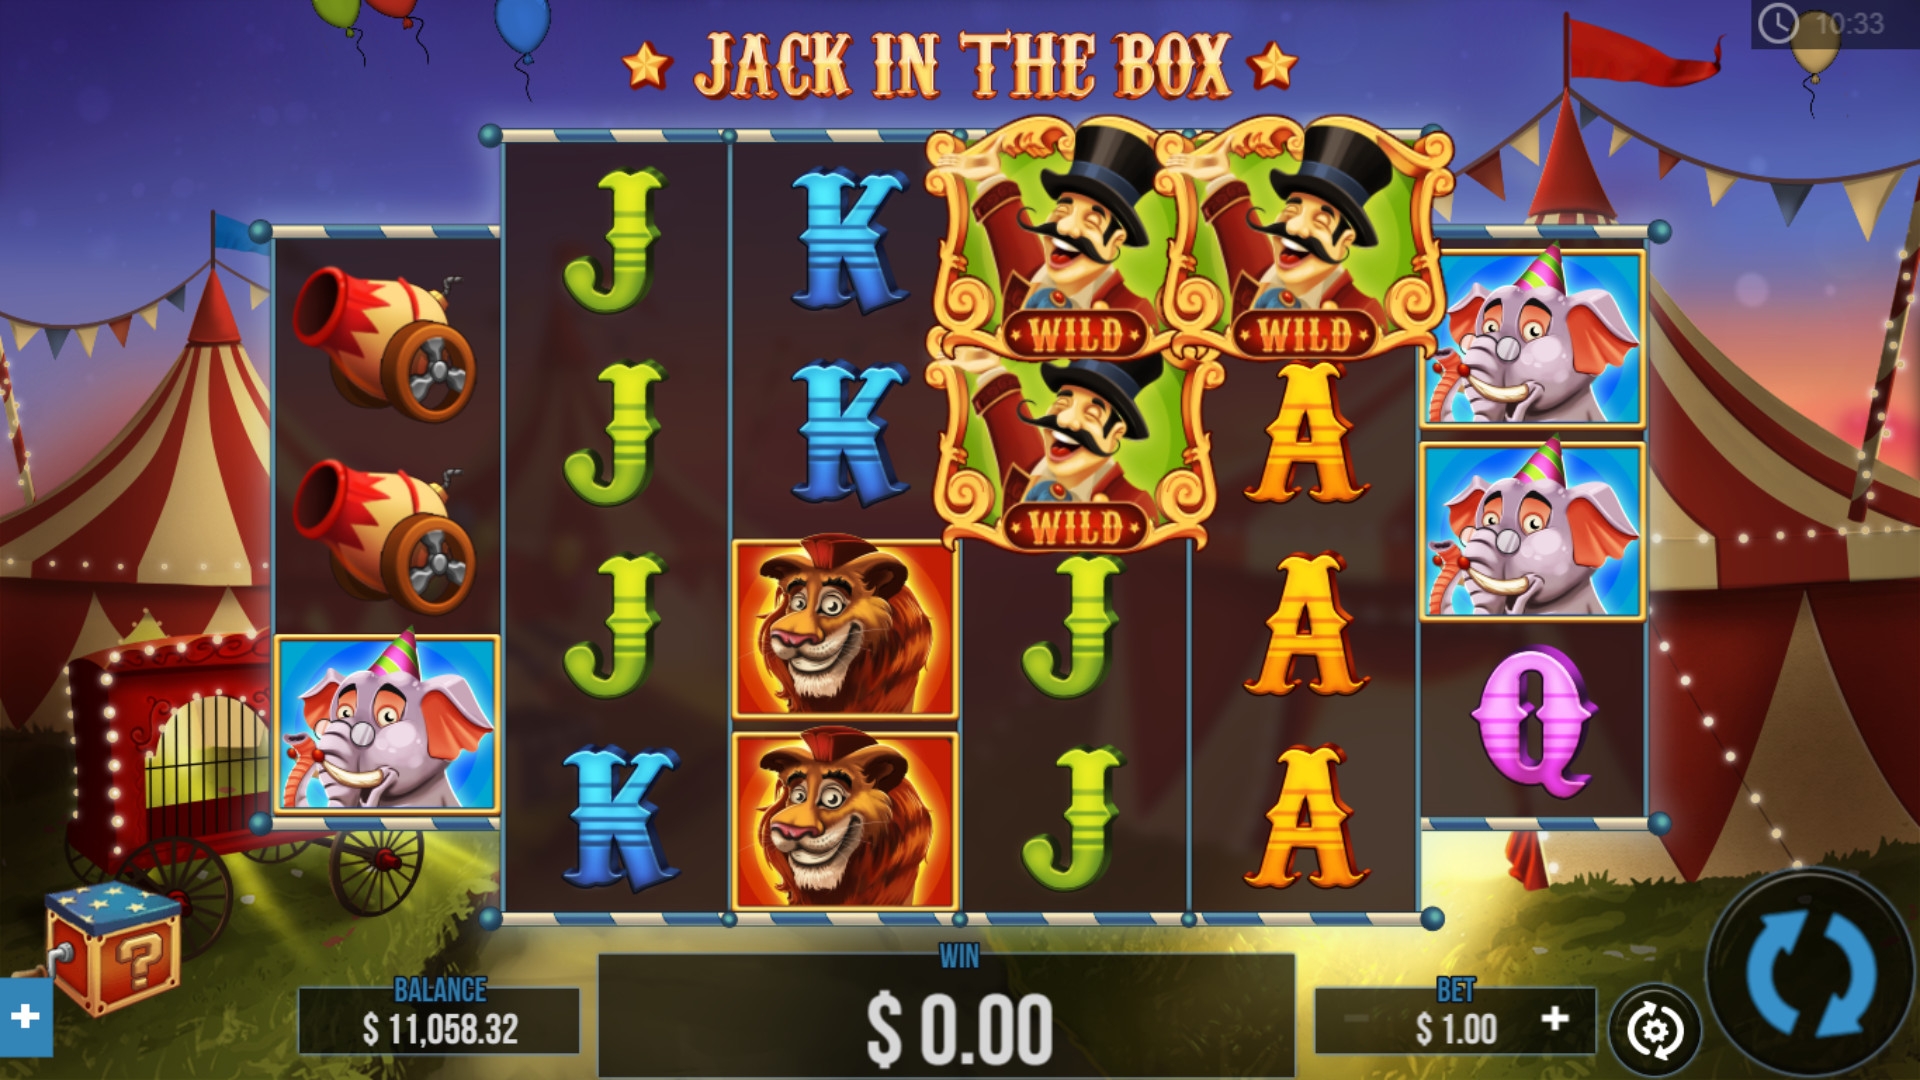 Jack in the Box (Jack in the Box) from category Slots